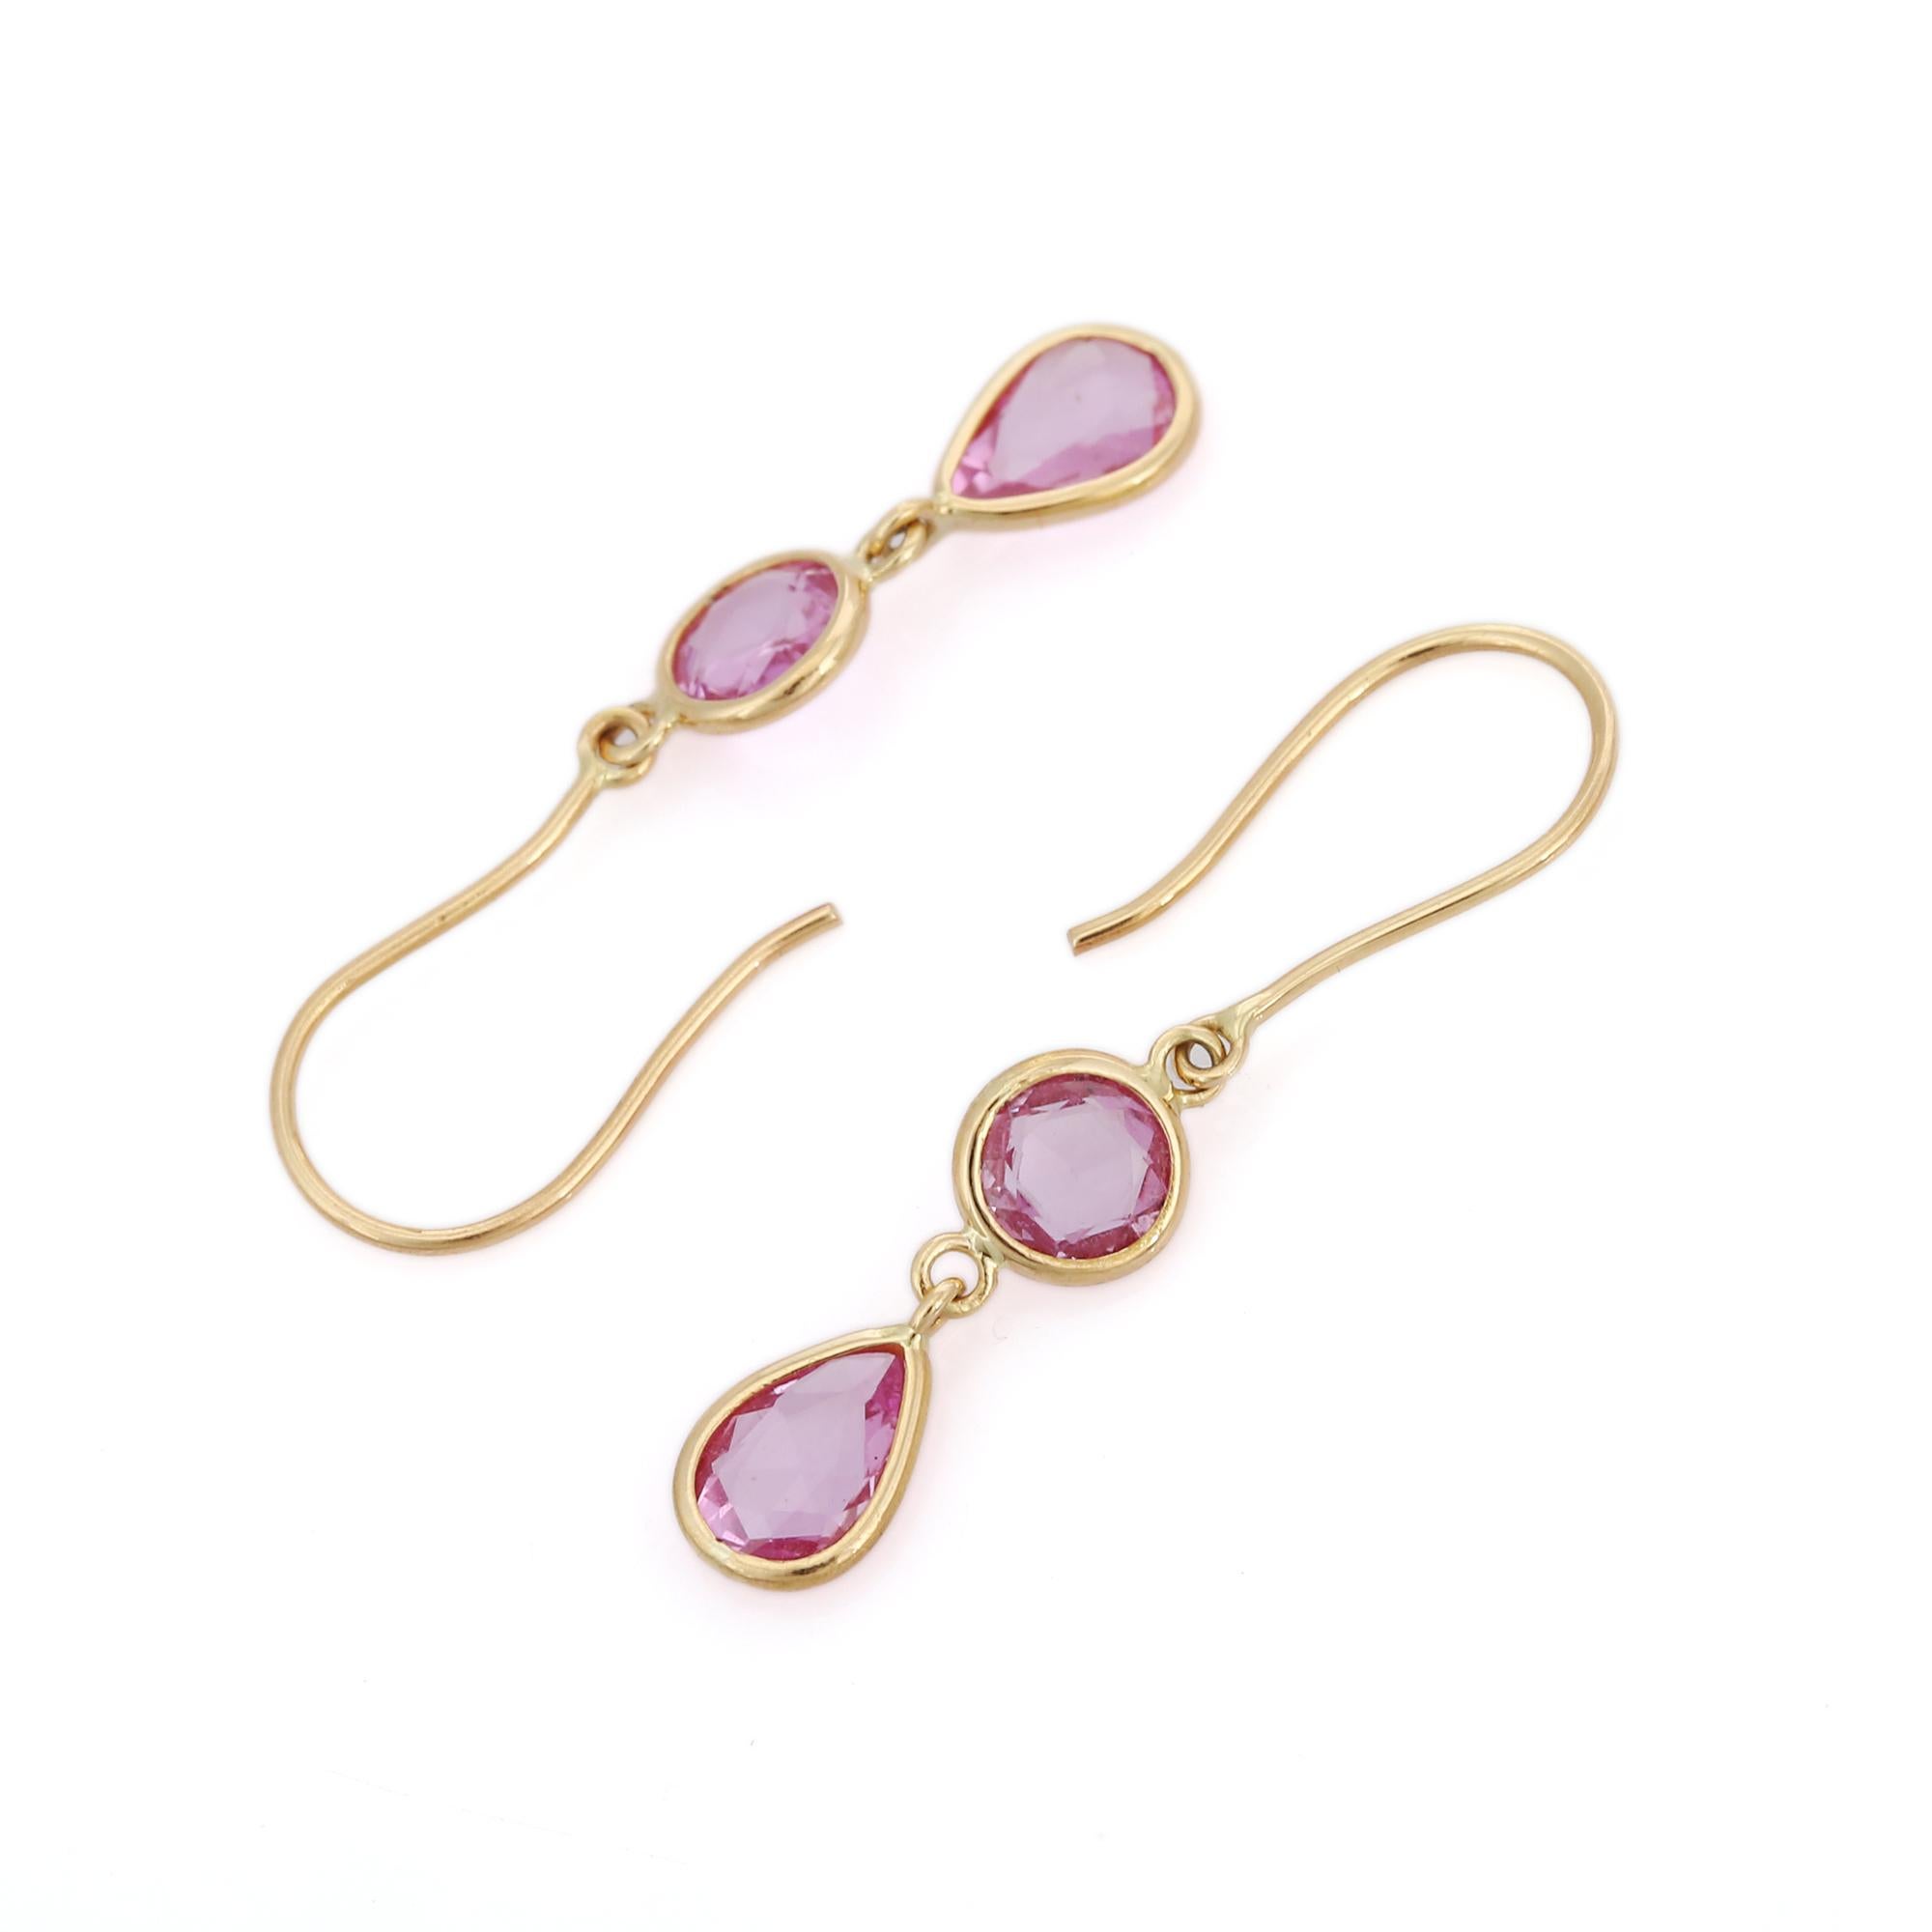 18K Yellow Gold Pink Sapphire Drop earrings to make a statement with your look. These earrings create a sparkling, luxurious look featuring pear and round cut gemstone.
If you love to gravitate towards unique styles, this piece of jewelry is perfect